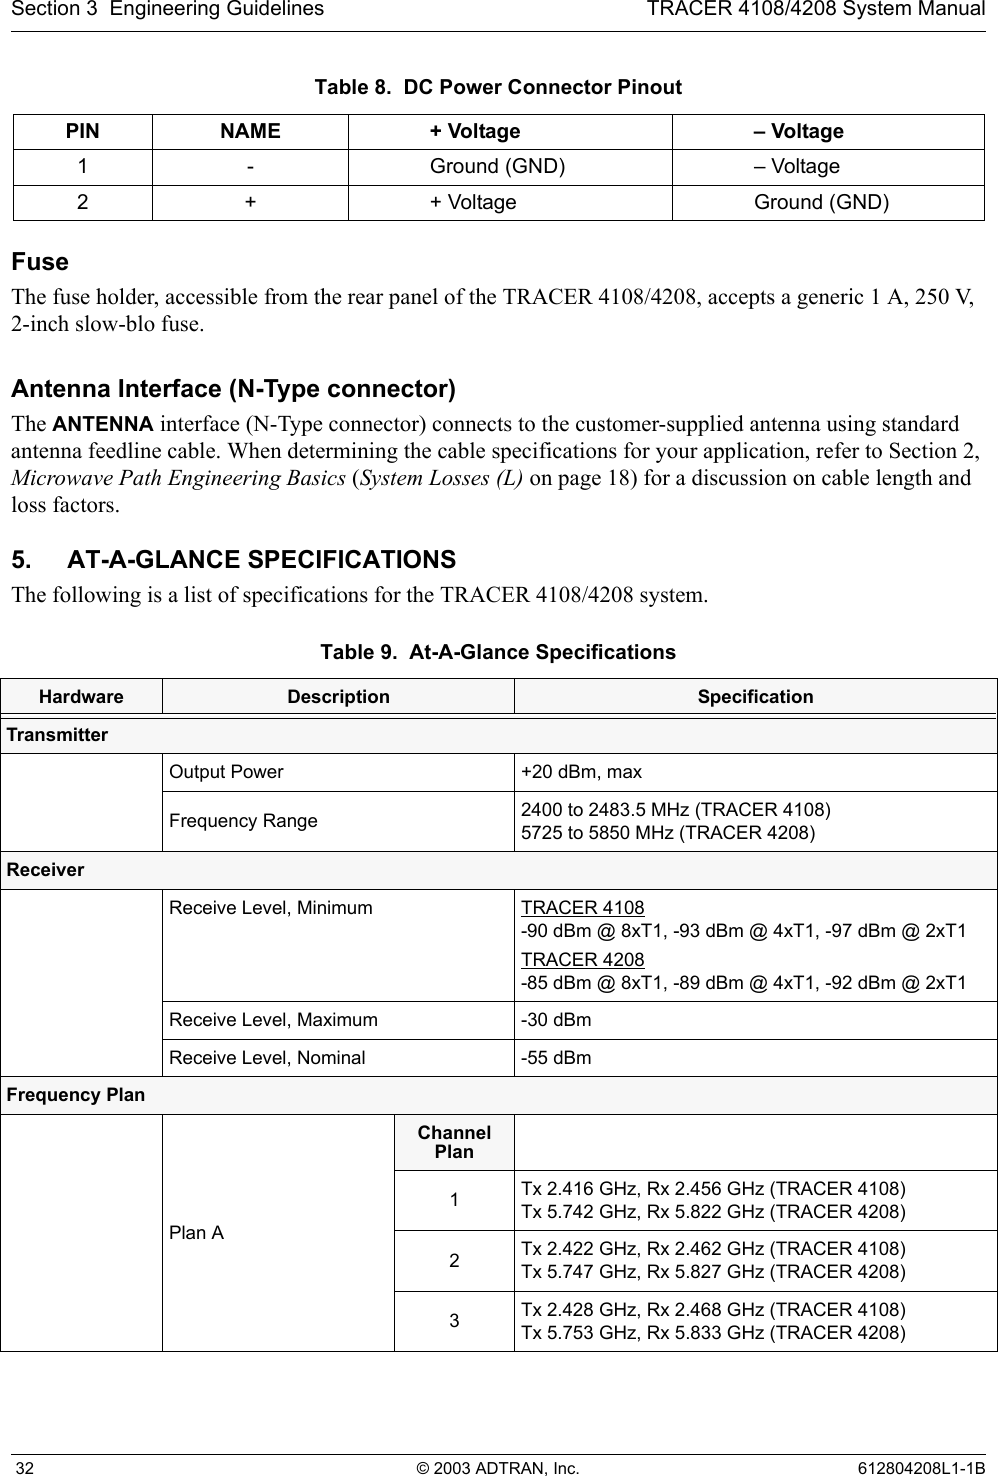 Section 3  Engineering Guidelines TRACER 4108/4208 System Manual 32 © 2003 ADTRAN, Inc. 612804208L1-1BFuseThe fuse holder, accessible from the rear panel of the TRACER 4108/4208, accepts a generic 1 A, 250 V, 2-inch slow-blo fuse.Antenna Interface (N-Type connector)The ANTENNA interface (N-Type connector) connects to the customer-supplied antenna using standard antenna feedline cable. When determining the cable specifications for your application, refer to Section 2, Microwave Path Engineering Basics (System Losses (L) on page 18) for a discussion on cable length and loss factors.5. AT-A-GLANCE SPECIFICATIONSThe following is a list of specifications for the TRACER 4108/4208 system.Table 8.  DC Power Connector PinoutPIN NAME + Voltage – Voltage1 - Ground (GND) – Voltage2 + + Voltage Ground (GND)Table 9.  At-A-Glance Specifications Hardware Description SpecificationTransmitterOutput Power +20 dBm, maxFrequency Range 2400 to 2483.5 MHz (TRACER 4108)5725 to 5850 MHz (TRACER 4208)ReceiverReceive Level, Minimum TRACER 4108-90 dBm @ 8xT1, -93 dBm @ 4xT1, -97 dBm @ 2xT1TRACER 4208-85 dBm @ 8xT1, -89 dBm @ 4xT1, -92 dBm @ 2xT1Receive Level, Maximum -30 dBmReceive Level, Nominal -55 dBmFrequency PlanPlan AChannel Plan1Tx 2.416 GHz, Rx 2.456 GHz (TRACER 4108)Tx 5.742 GHz, Rx 5.822 GHz (TRACER 4208)2Tx 2.422 GHz, Rx 2.462 GHz (TRACER 4108)Tx 5.747 GHz, Rx 5.827 GHz (TRACER 4208)3Tx 2.428 GHz, Rx 2.468 GHz (TRACER 4108)Tx 5.753 GHz, Rx 5.833 GHz (TRACER 4208)